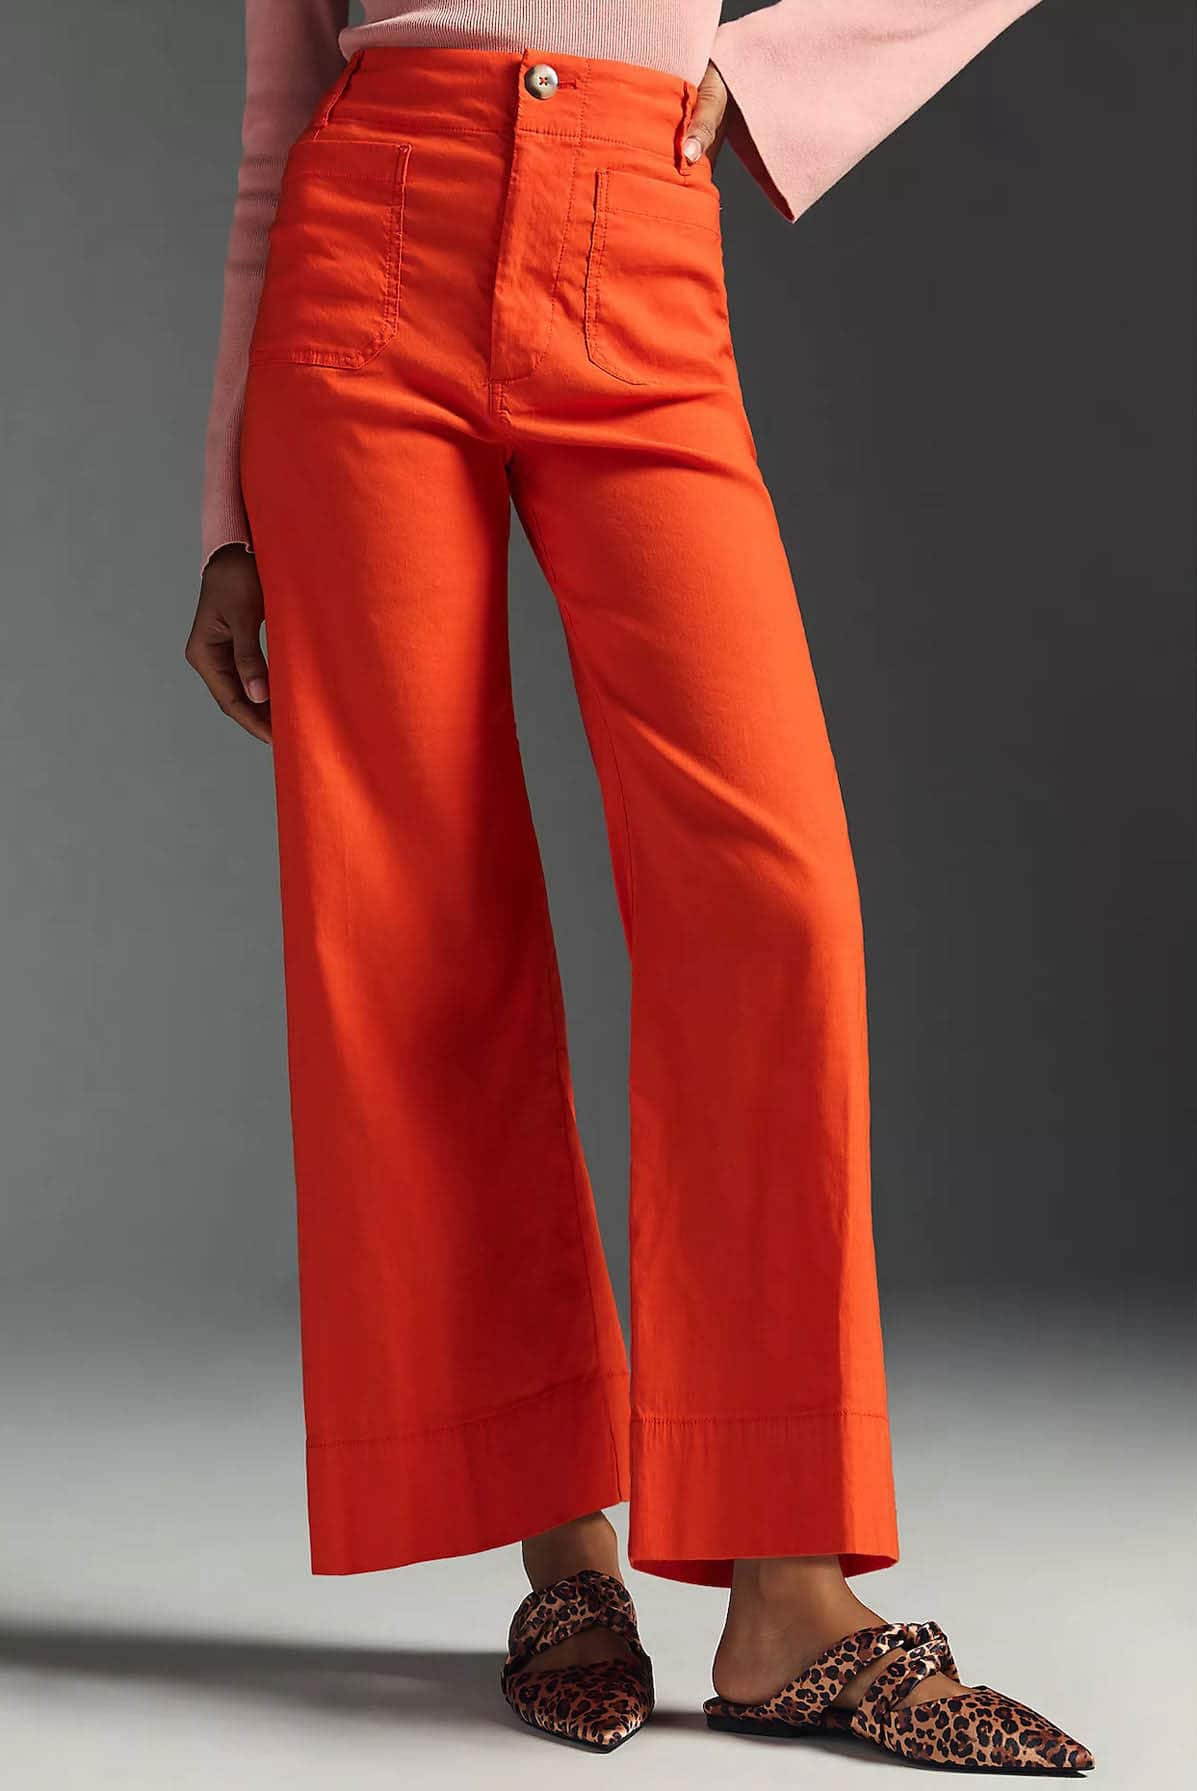 things i bought this week and loved - these bright red cropped wide-leg linen pants